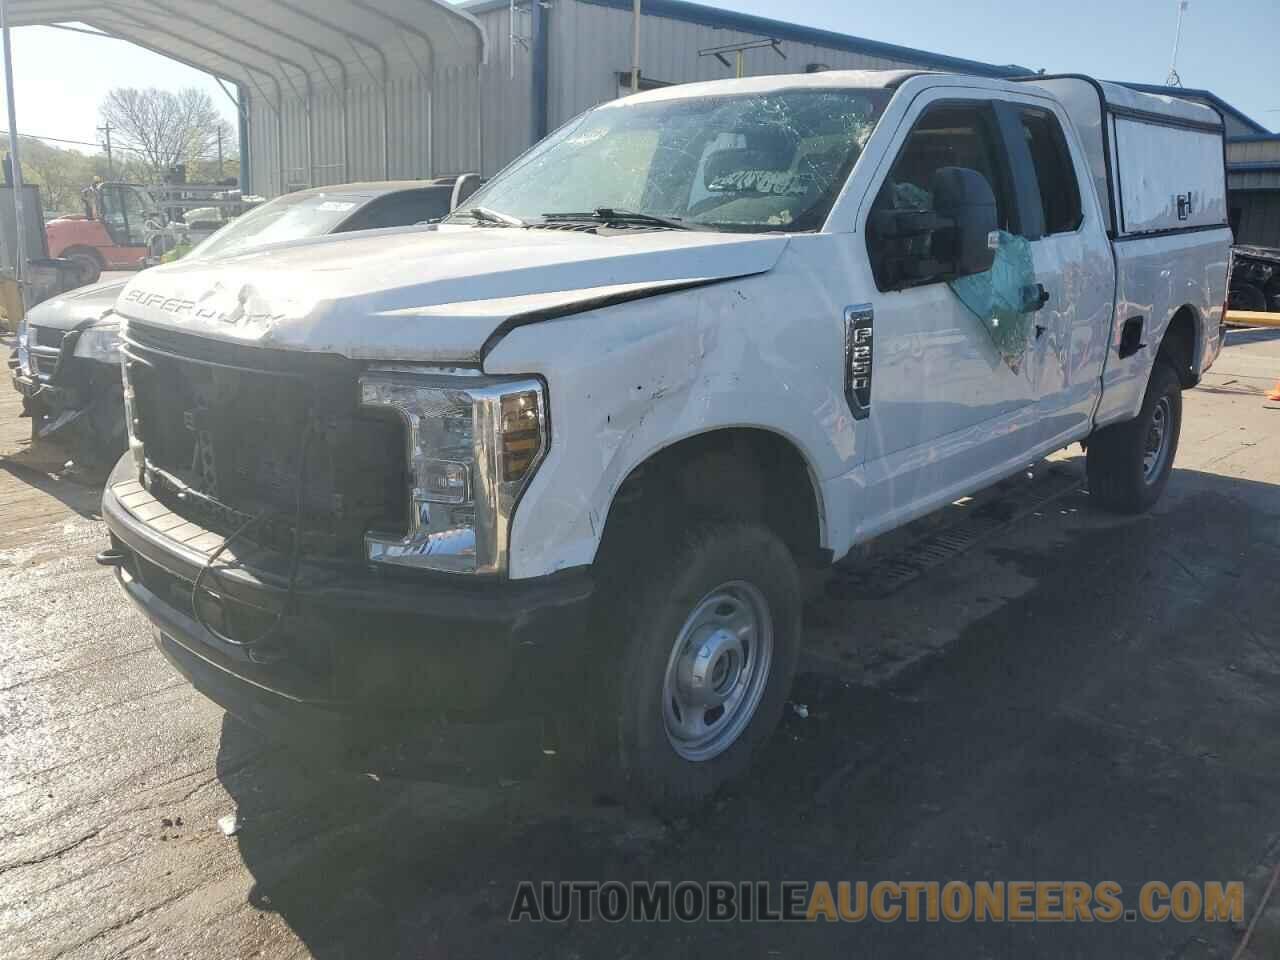 1FT7X2B6XKEE68394 FORD F250 2019